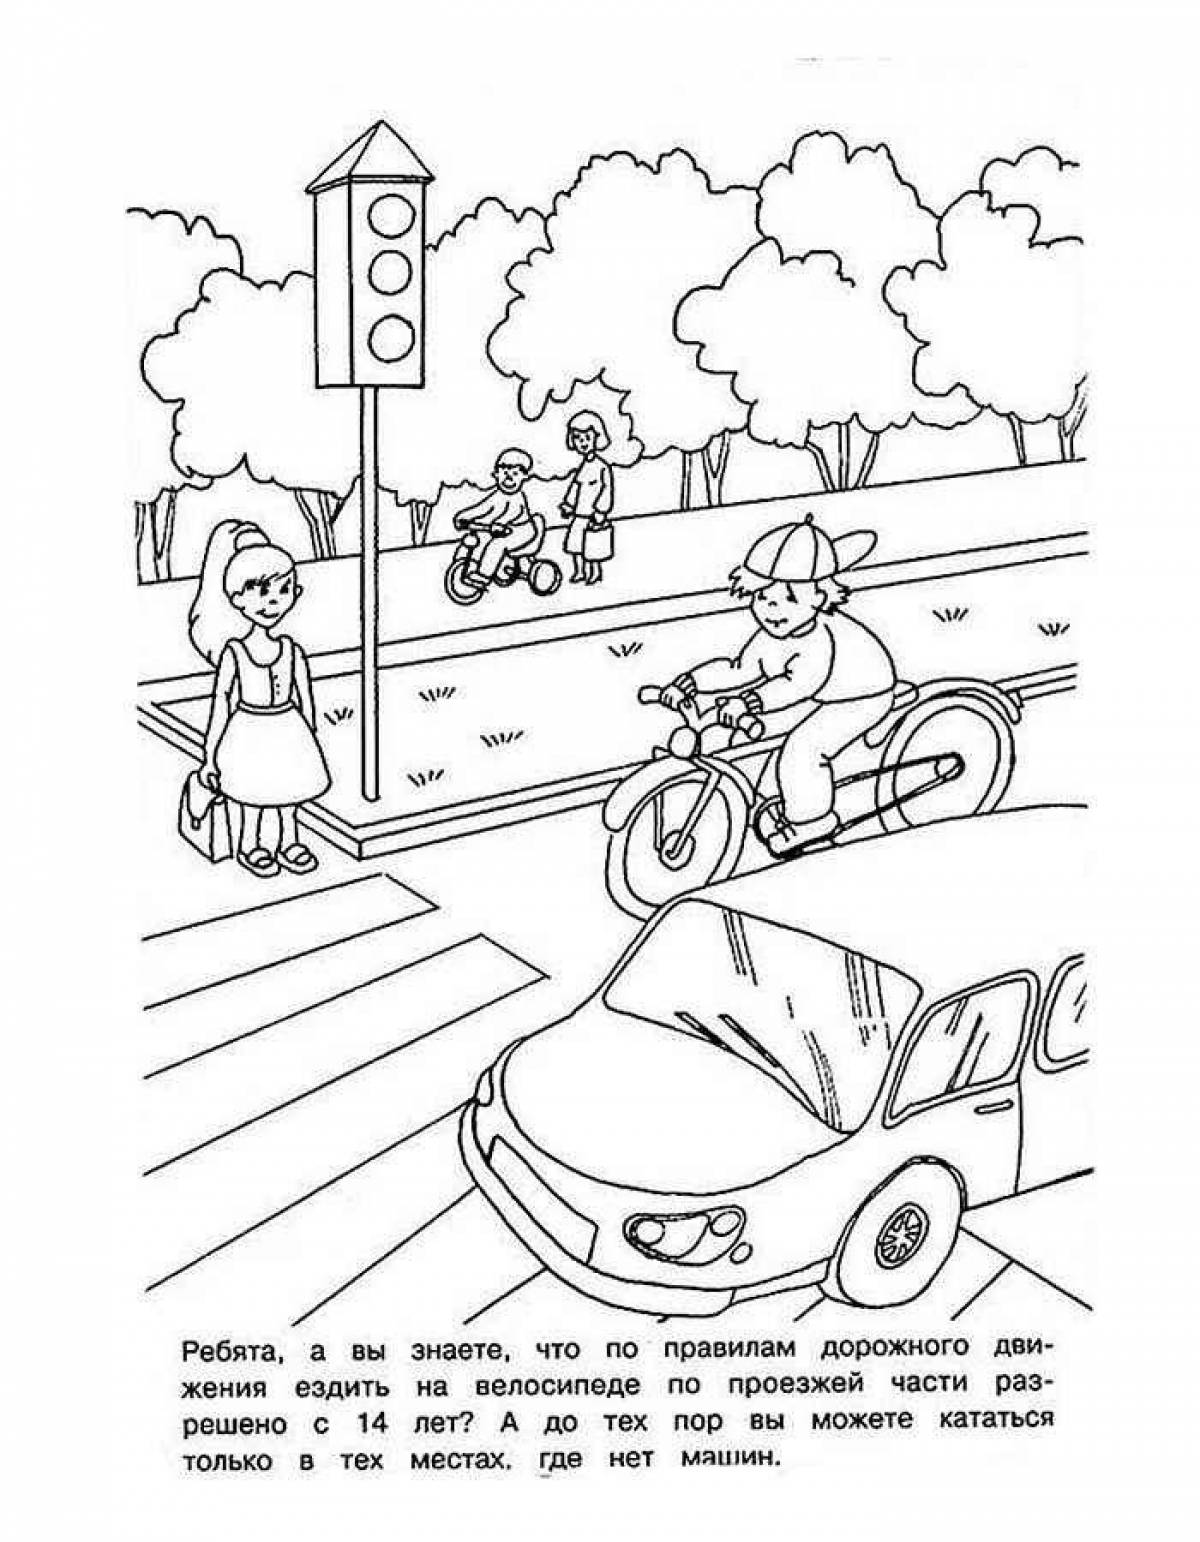 Bright rules of the road coloring for children